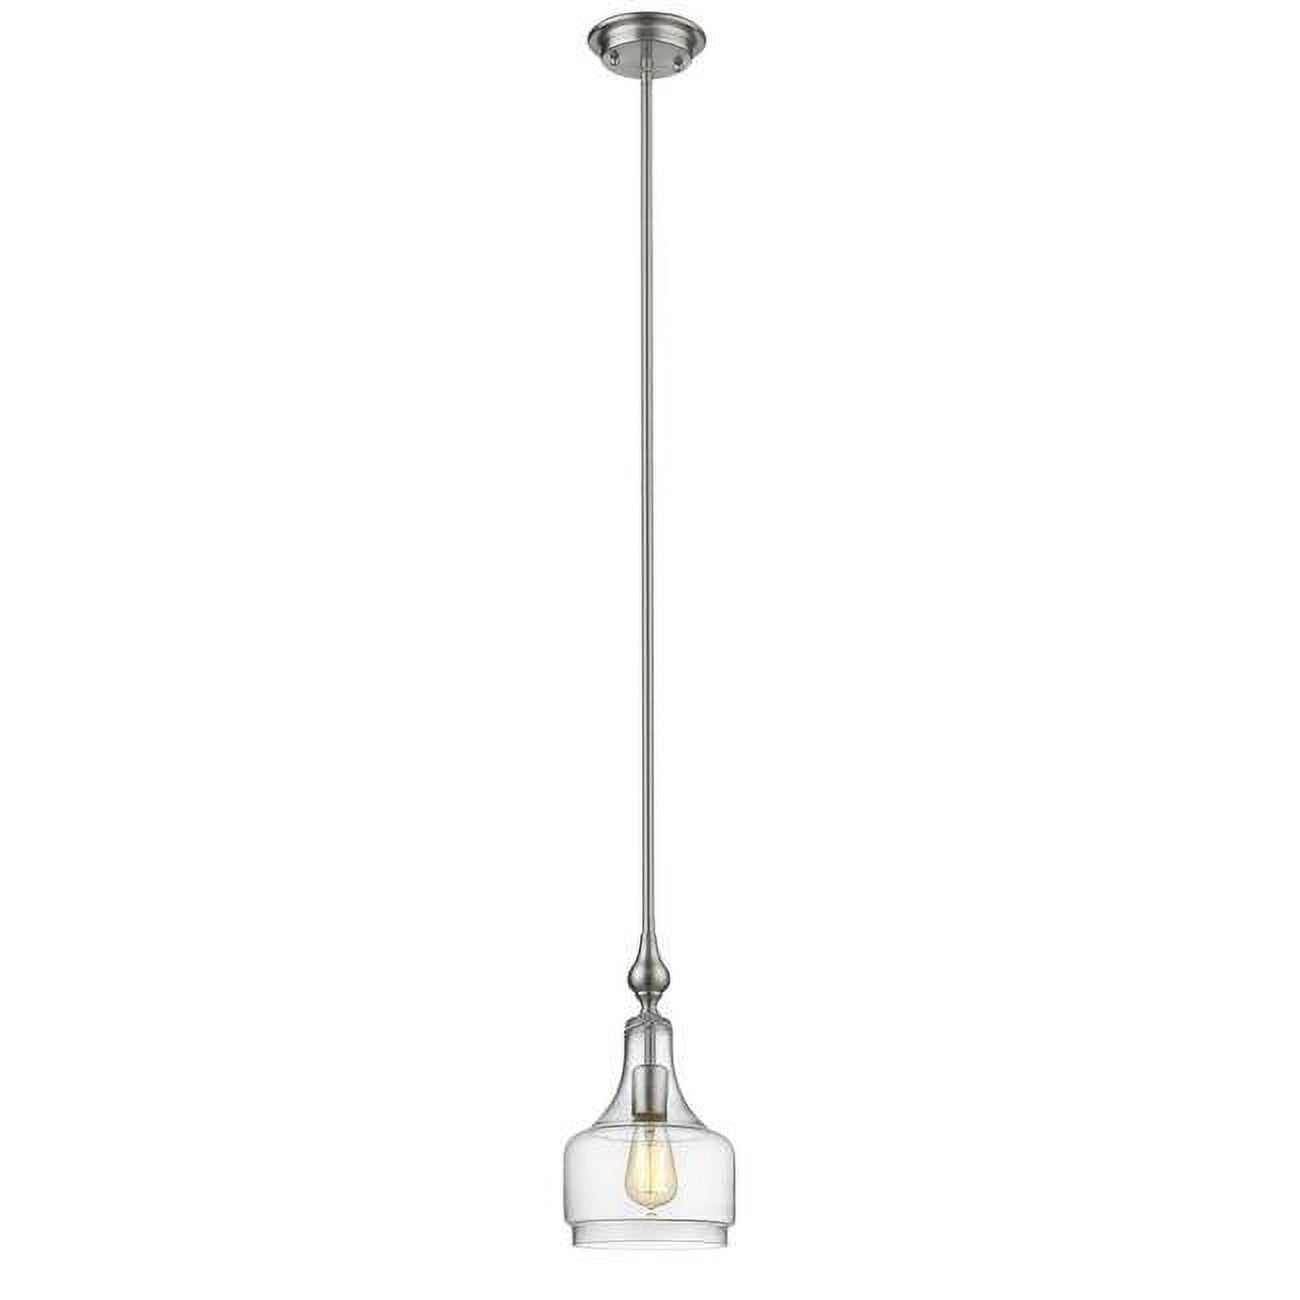 Ch2s007bn08-dp1 Layla Transitional 1 Light Brushed Nickel Ceiling Mini Pendant - 8 In.